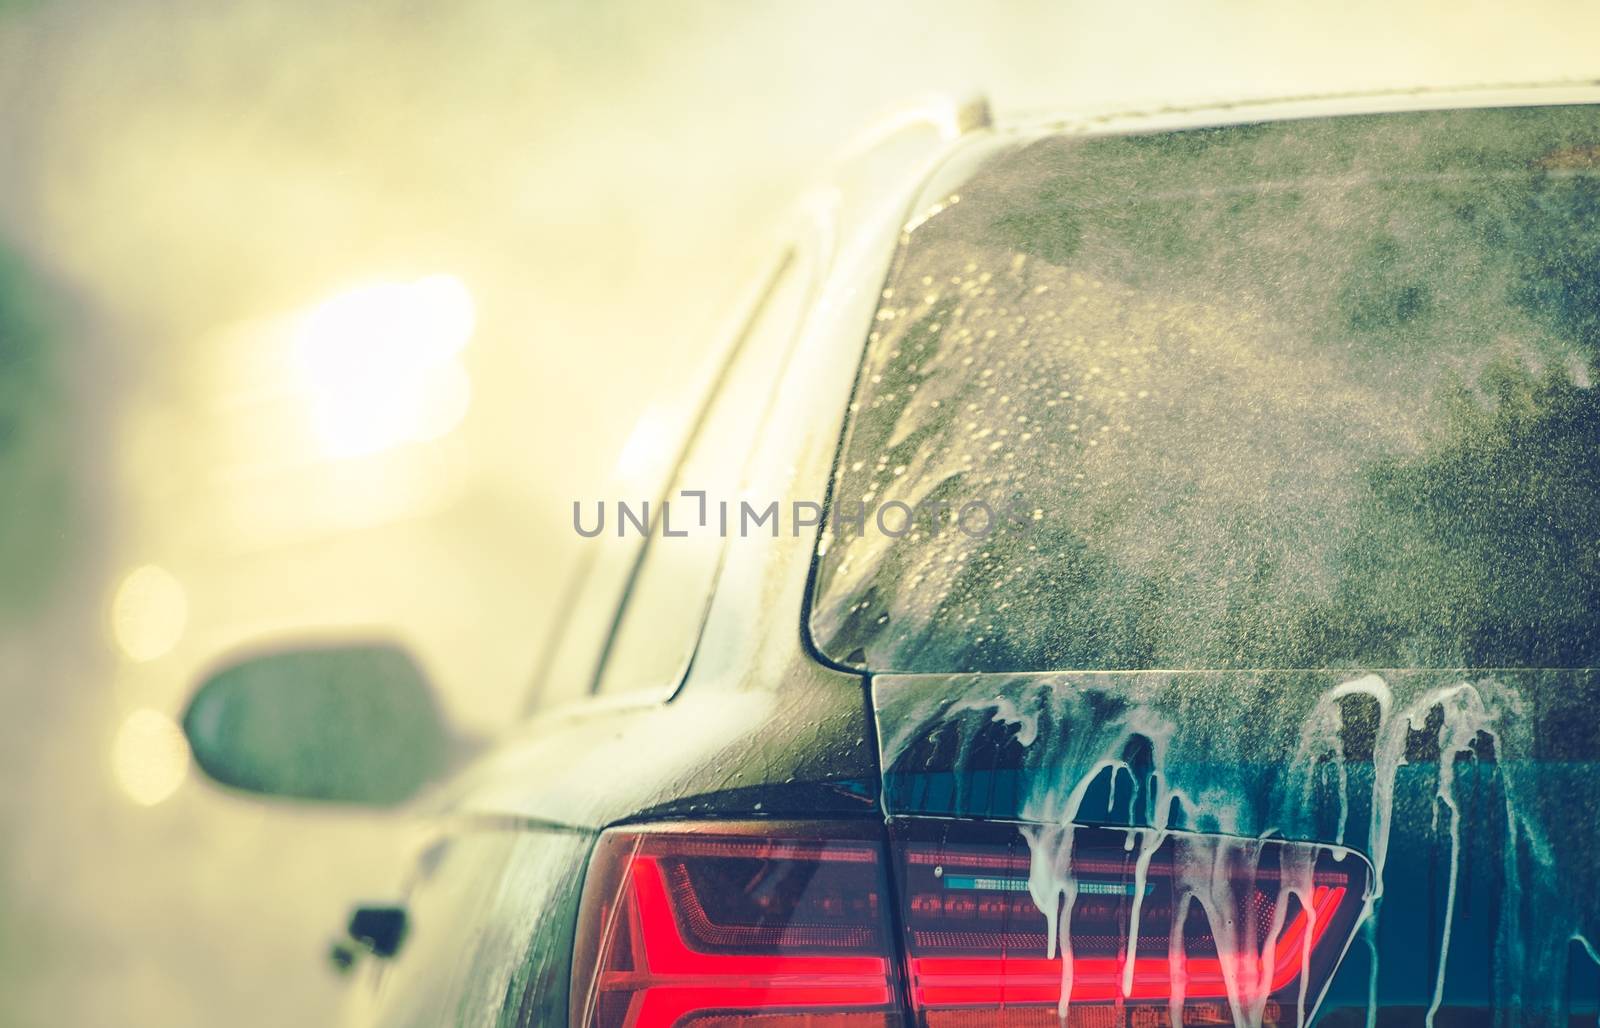 Cleaning Vehicle in Car Wash by welcomia